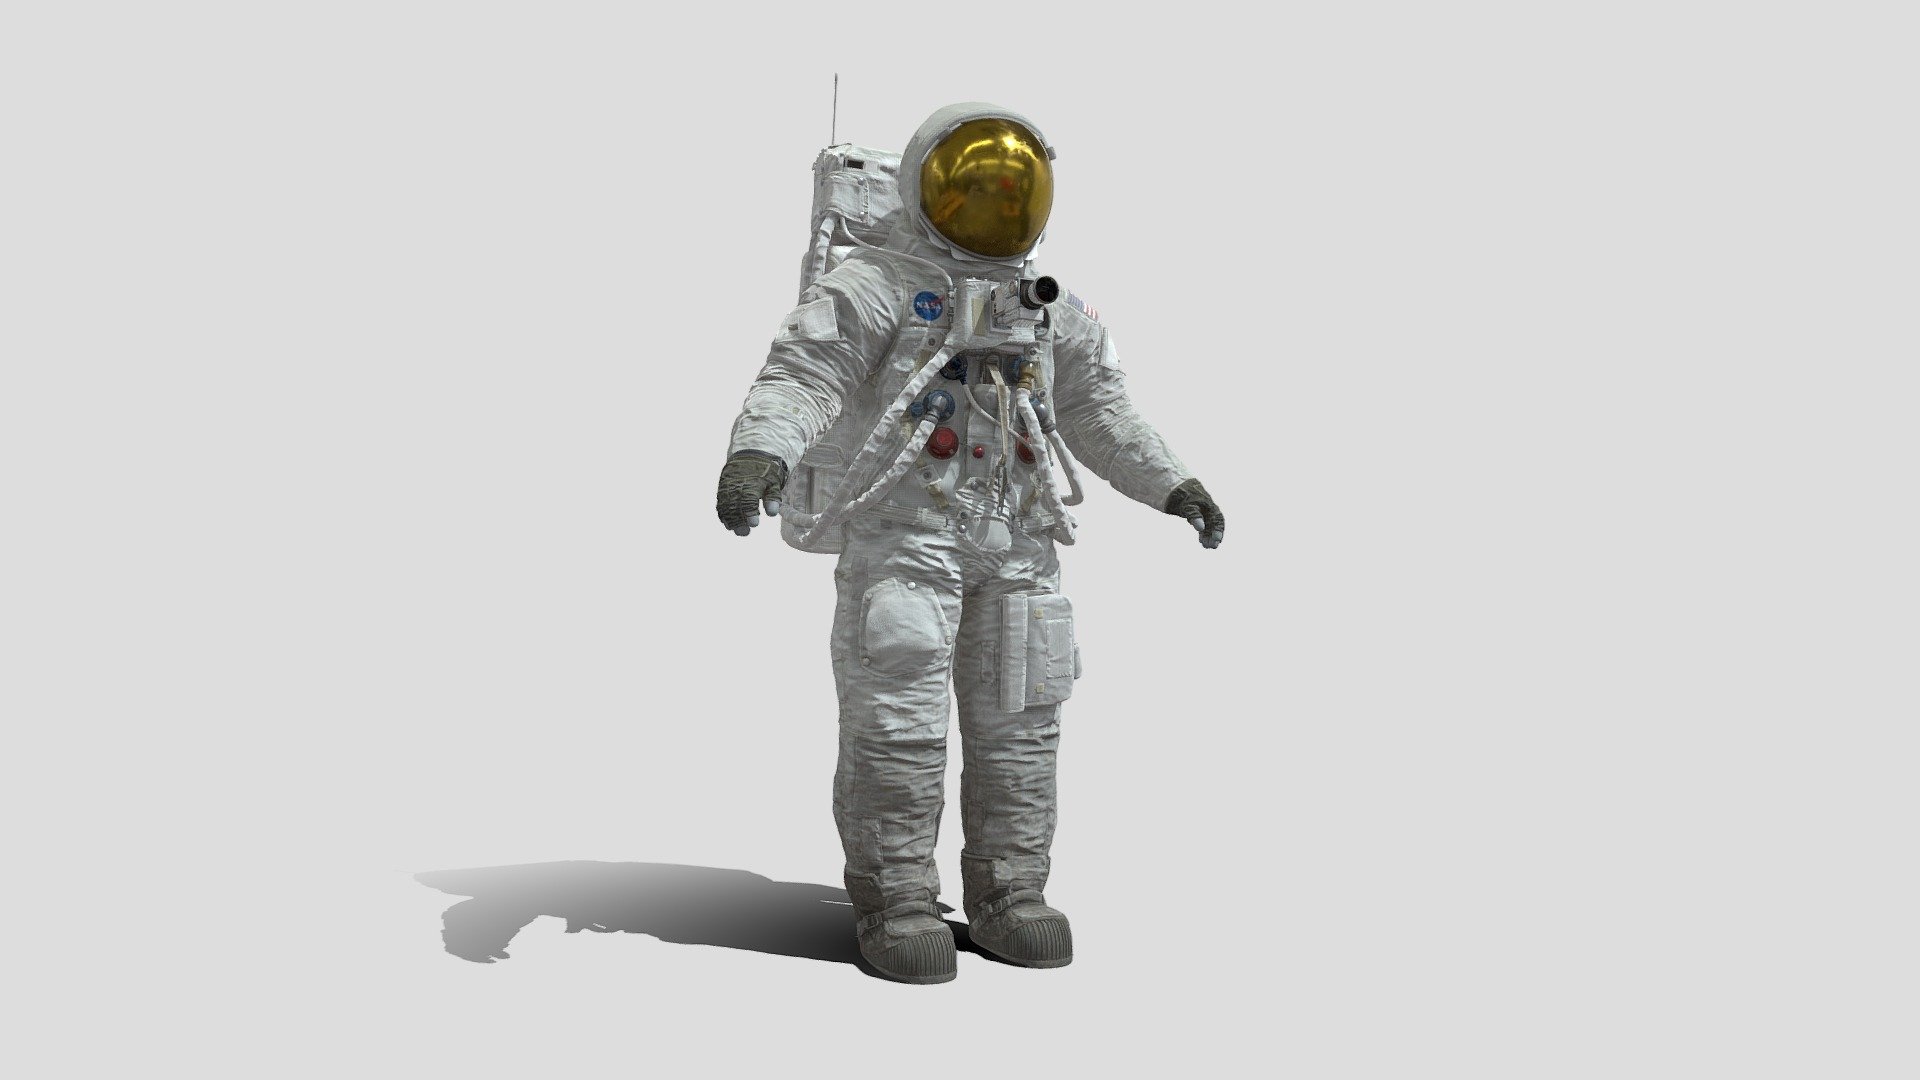 3D Apollo 11 A7L astronaut spacesuit with Helmet, Torso Camera, Gloves and Boots modeled in high precision. this is a mix between several references i found, some parts are freely interprated. this model has been accurately recreated in 3d High poly to keep every details.

*Including : *

Apollo Gloves
Apollo Helmet
Apollo Boots, Inner &amp; Outer
Apollo Backpack
Accessories, hasselblad Camera, hoses.
This model is Rigged and Skinned as shown on the product preview pictures and video. ( no animation included, the video shows the Rig with a mixamo motion capture sequence ), Using UDIM UVs industry standard workflow

4K Textures. (PBR Metallic Roughness, UDIM uvs ) compressed in the ZIP file

Blender, UDIM Uvs, RIGGED Rigify, Texture Packed
Blender, UDIM Uvs, RIGGED Mocap, Texture Packed
Blender, UDIM Uvs, UNREAL 4 Mannequin RIGGED
Blender, UDIM Uvs, UNREAL 5 Mannequin RIGGED
ABC, UDIM Uvs
OBJ, UDIM Uvs
FBX, UDIM Uvs, RIGGED Mocap
FBX, UDIM Uvs, RIGGED UNREAL 4 Mannequin
FBX, UDIM Uvs, RIGGED UNREAL 5 Mannequin - Apollo 11 A7L Spacesuit Rigged - Buy Royalty Free 3D model by Albin (@albinmerle) 3d model